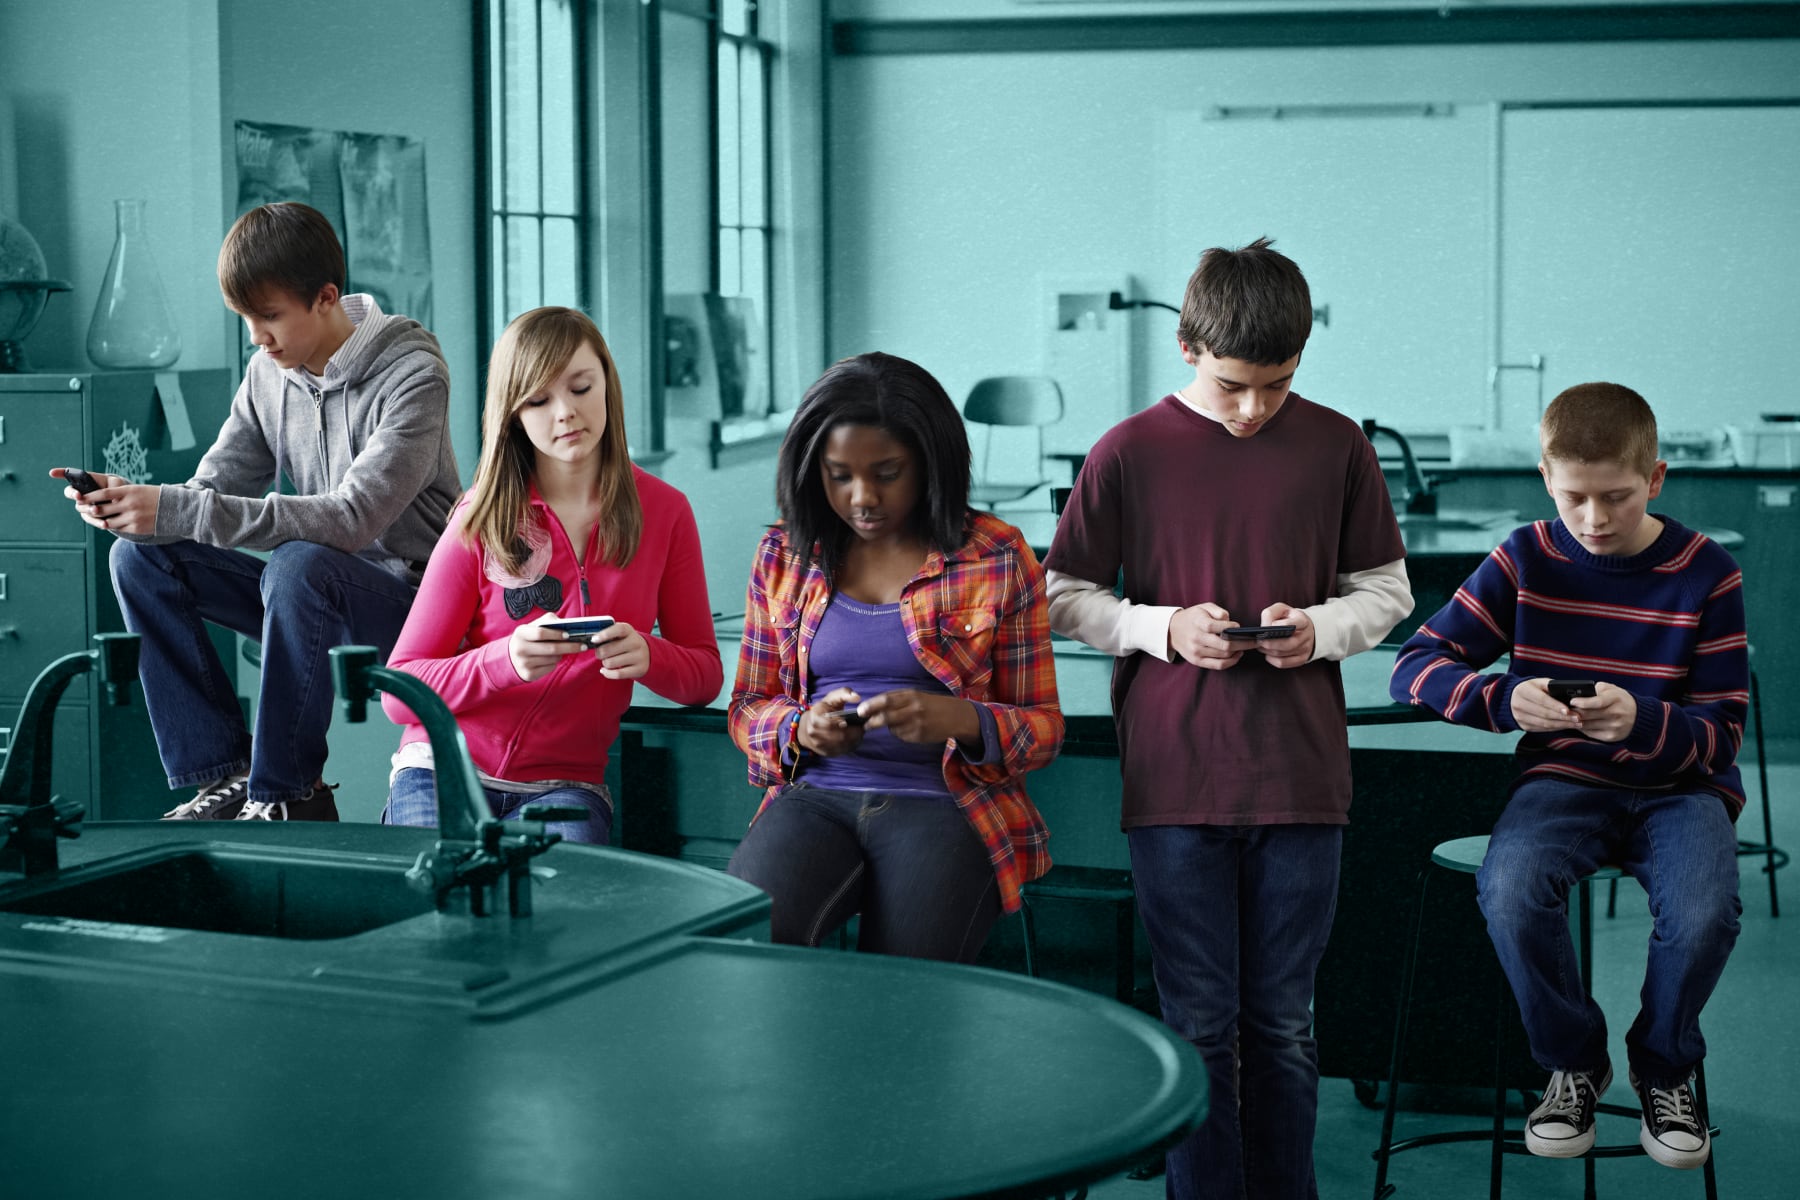 Group of students on smartphones in a classroom.